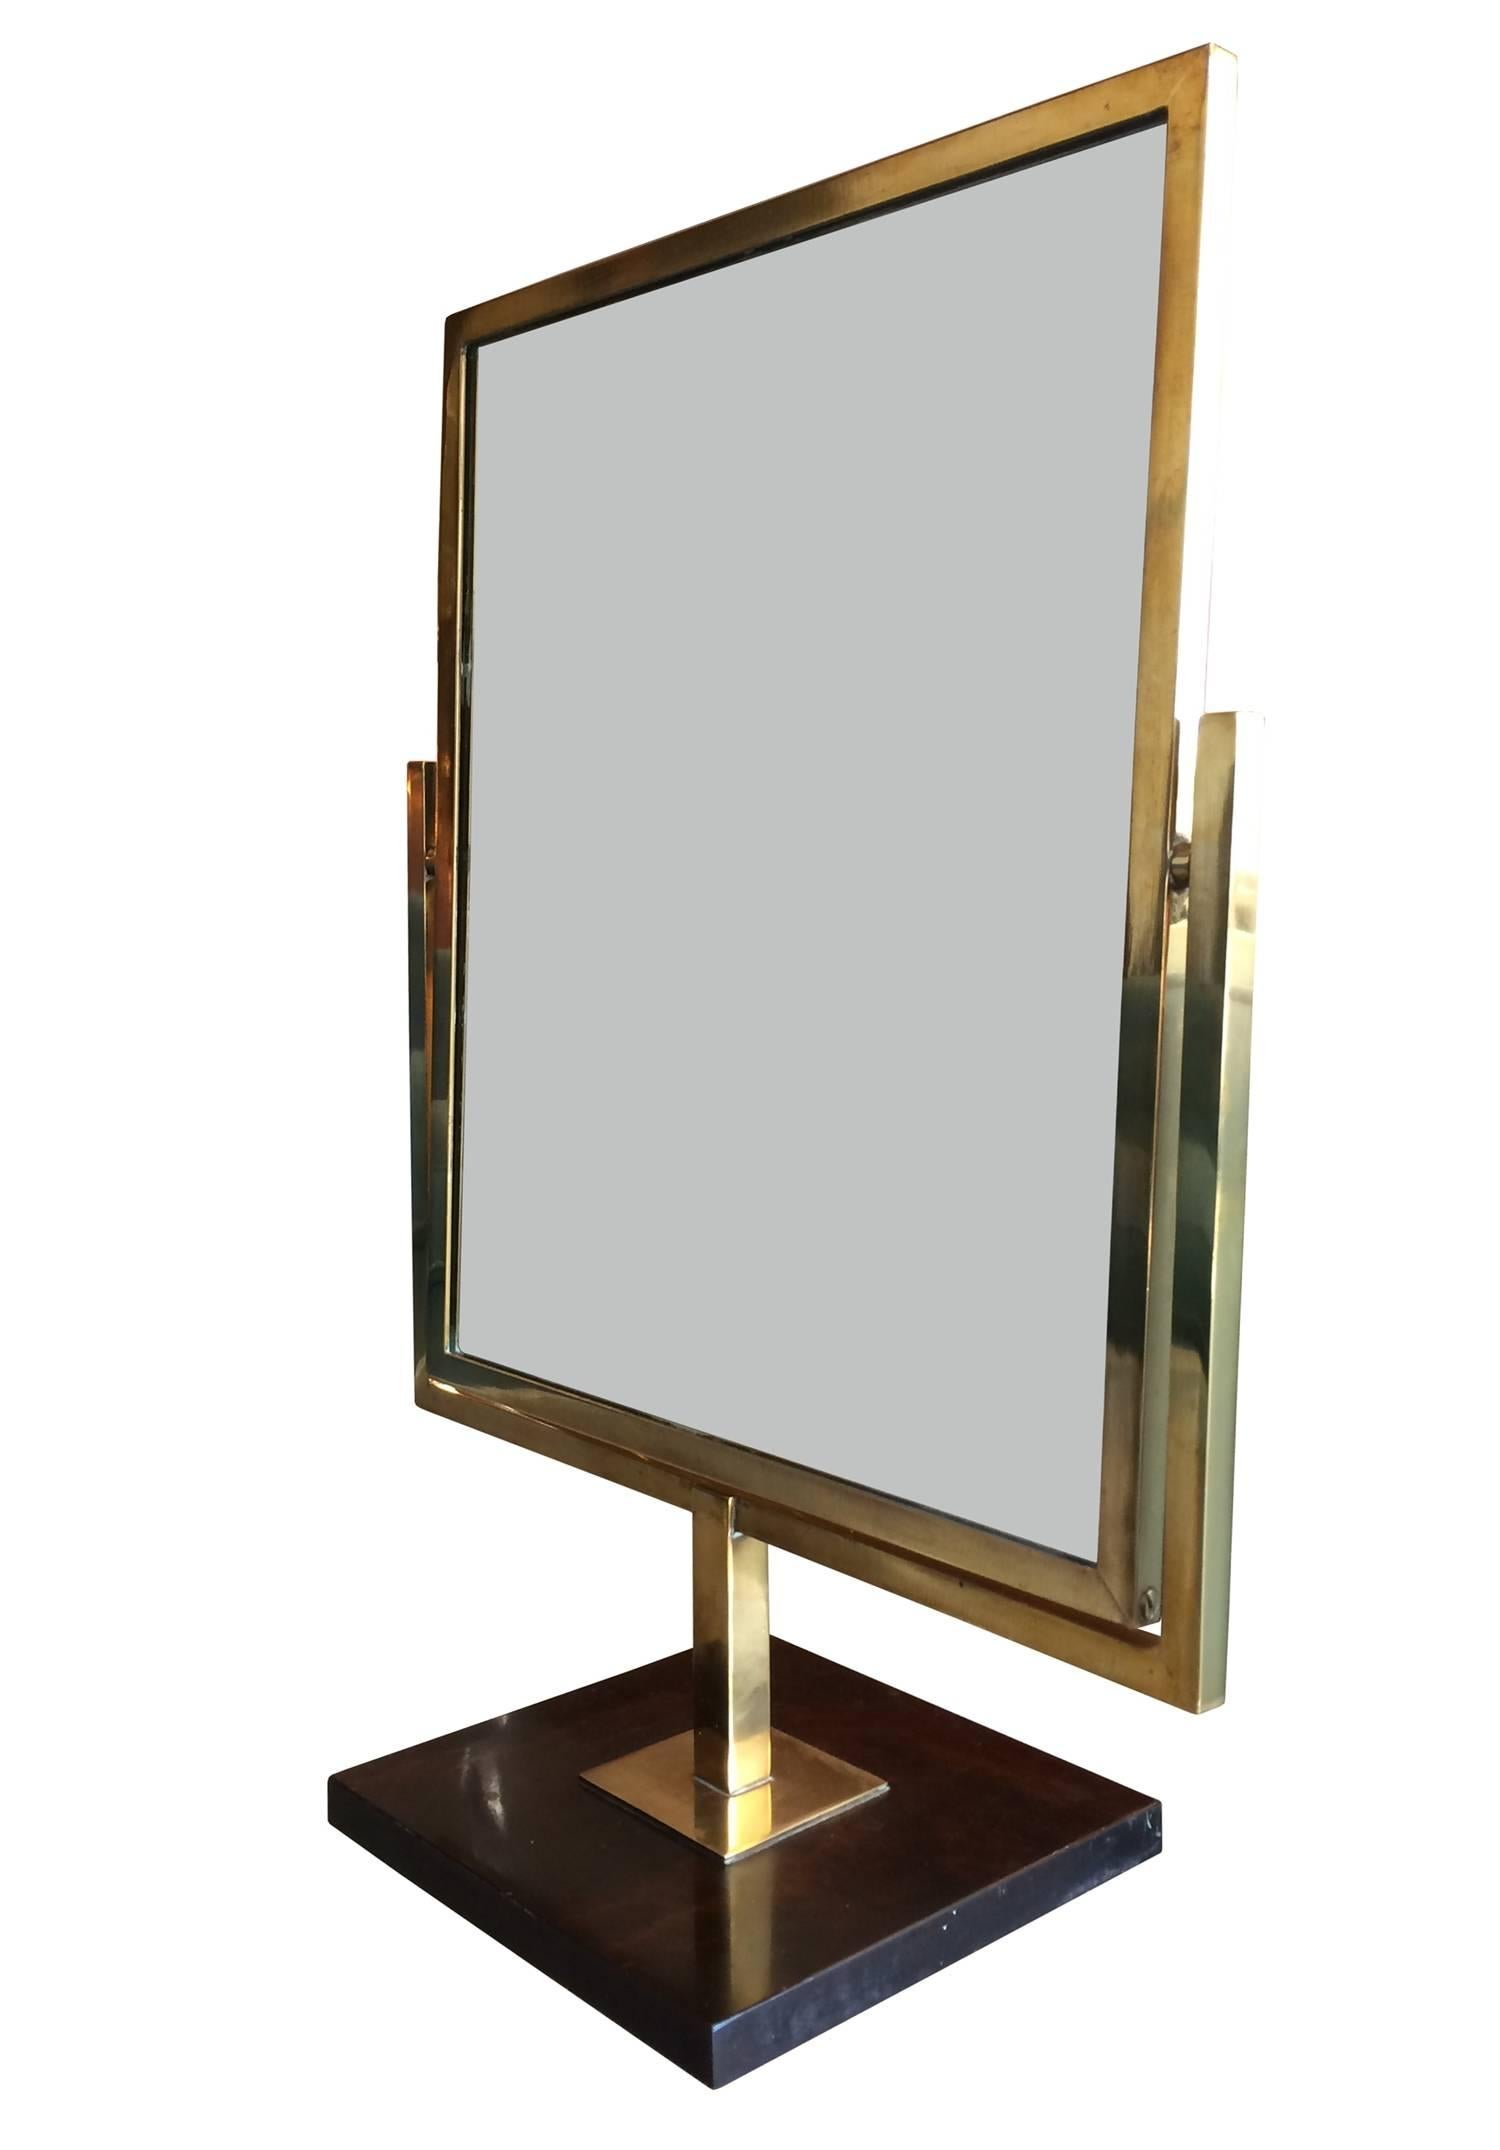 Beautiful double sided mirror in brass and burl wood designed and manufactured by Charles Hollis Jones.
The brass shows a nice aged patina and the burl wood base has a nice lacquered finish to it.
The mirror can be used from either side and it